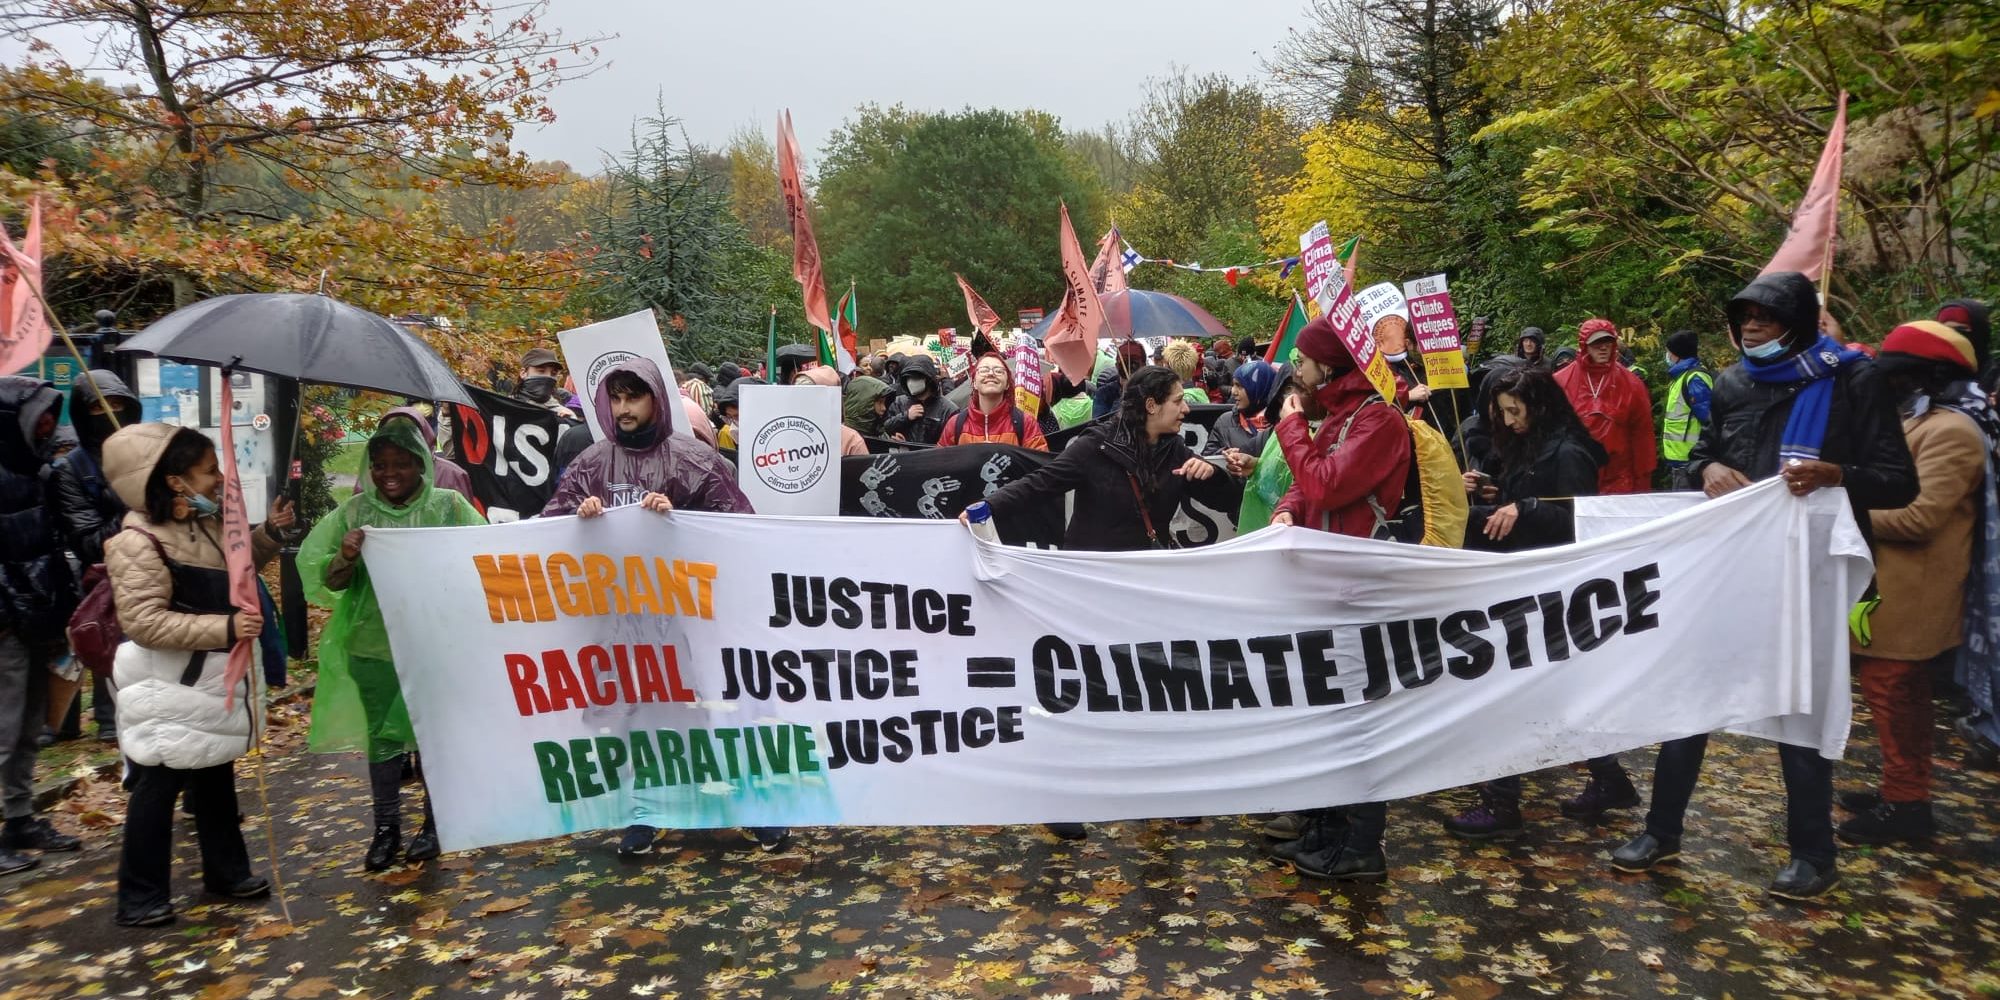 demo with climate Justice equals migrant justice, racial justice and reparative justice.